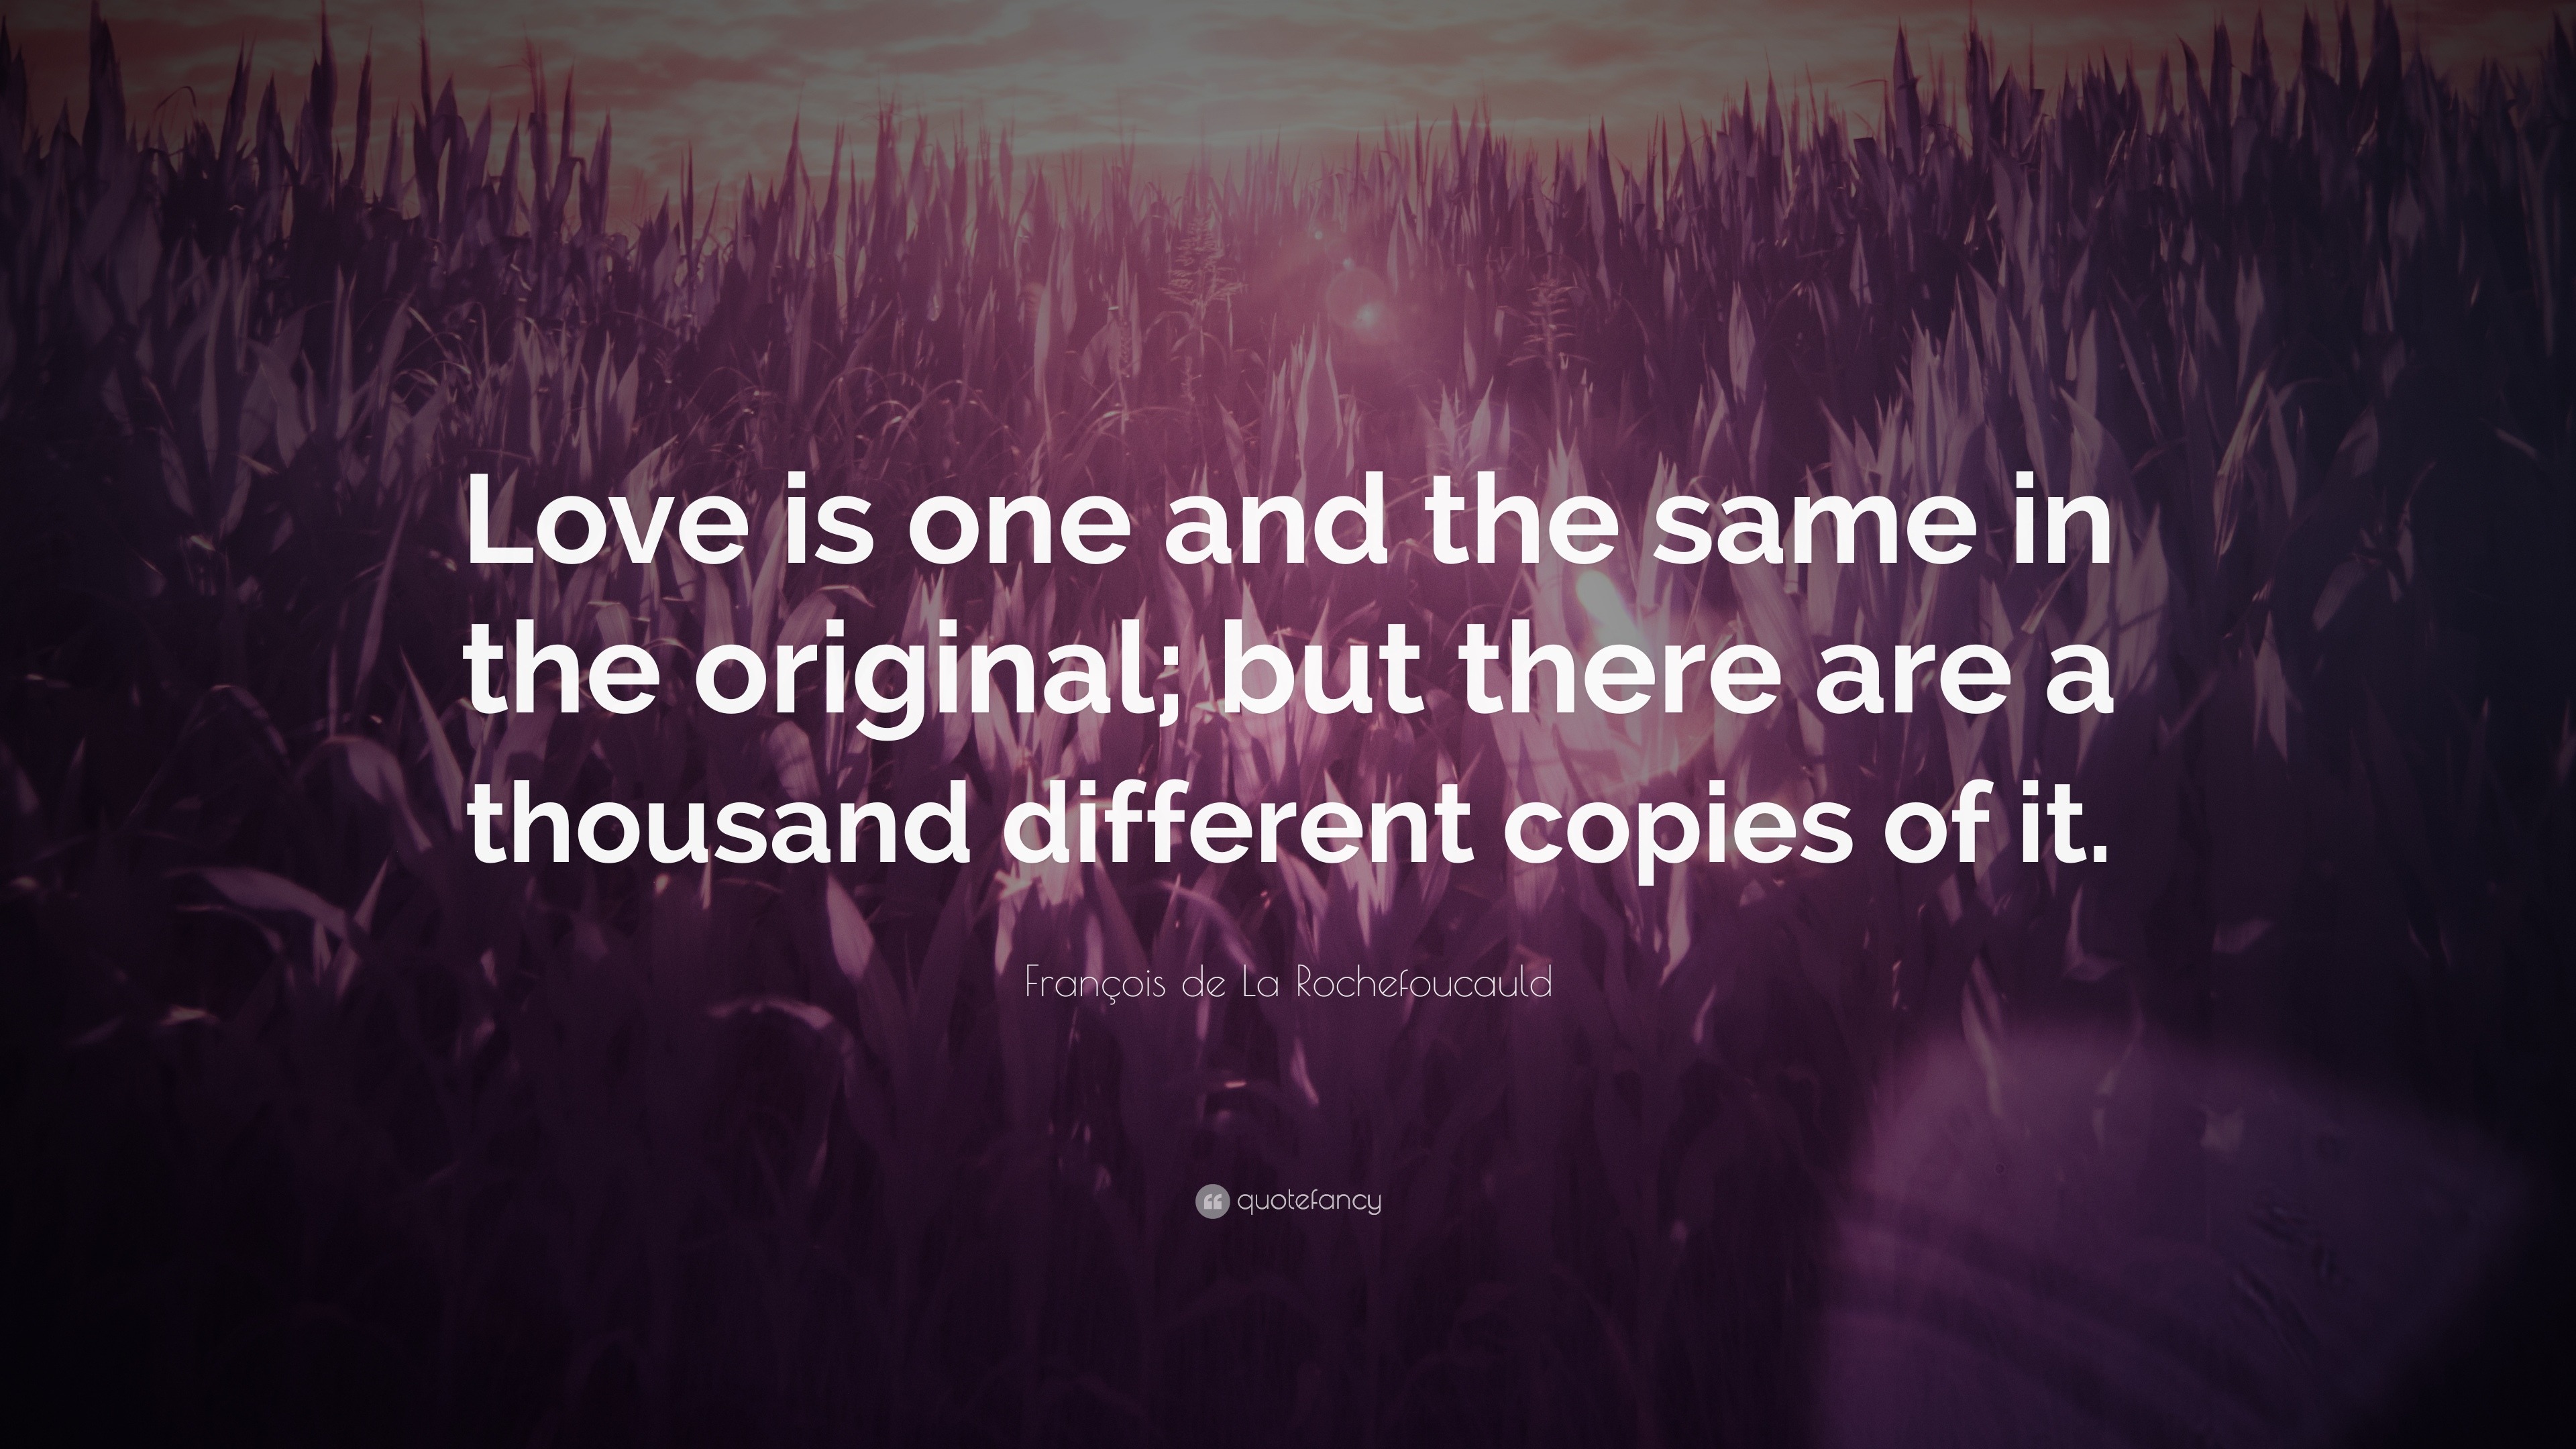 François de La Rochefoucauld Quote: “Love is one and the same in the ...